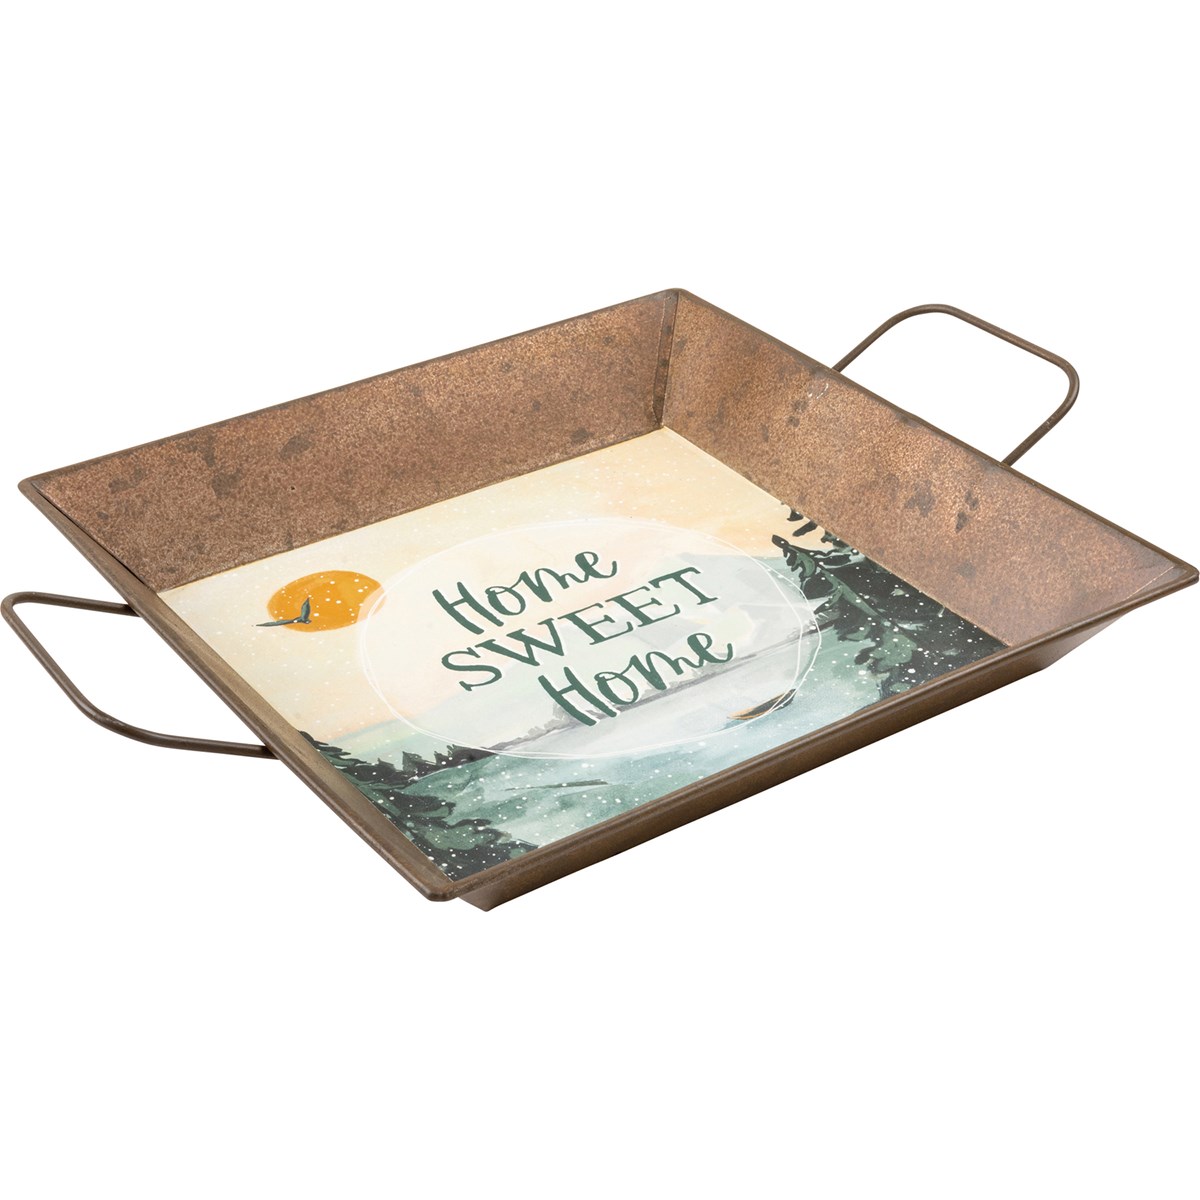 Home Sweet Home Tray - Metal, Paper